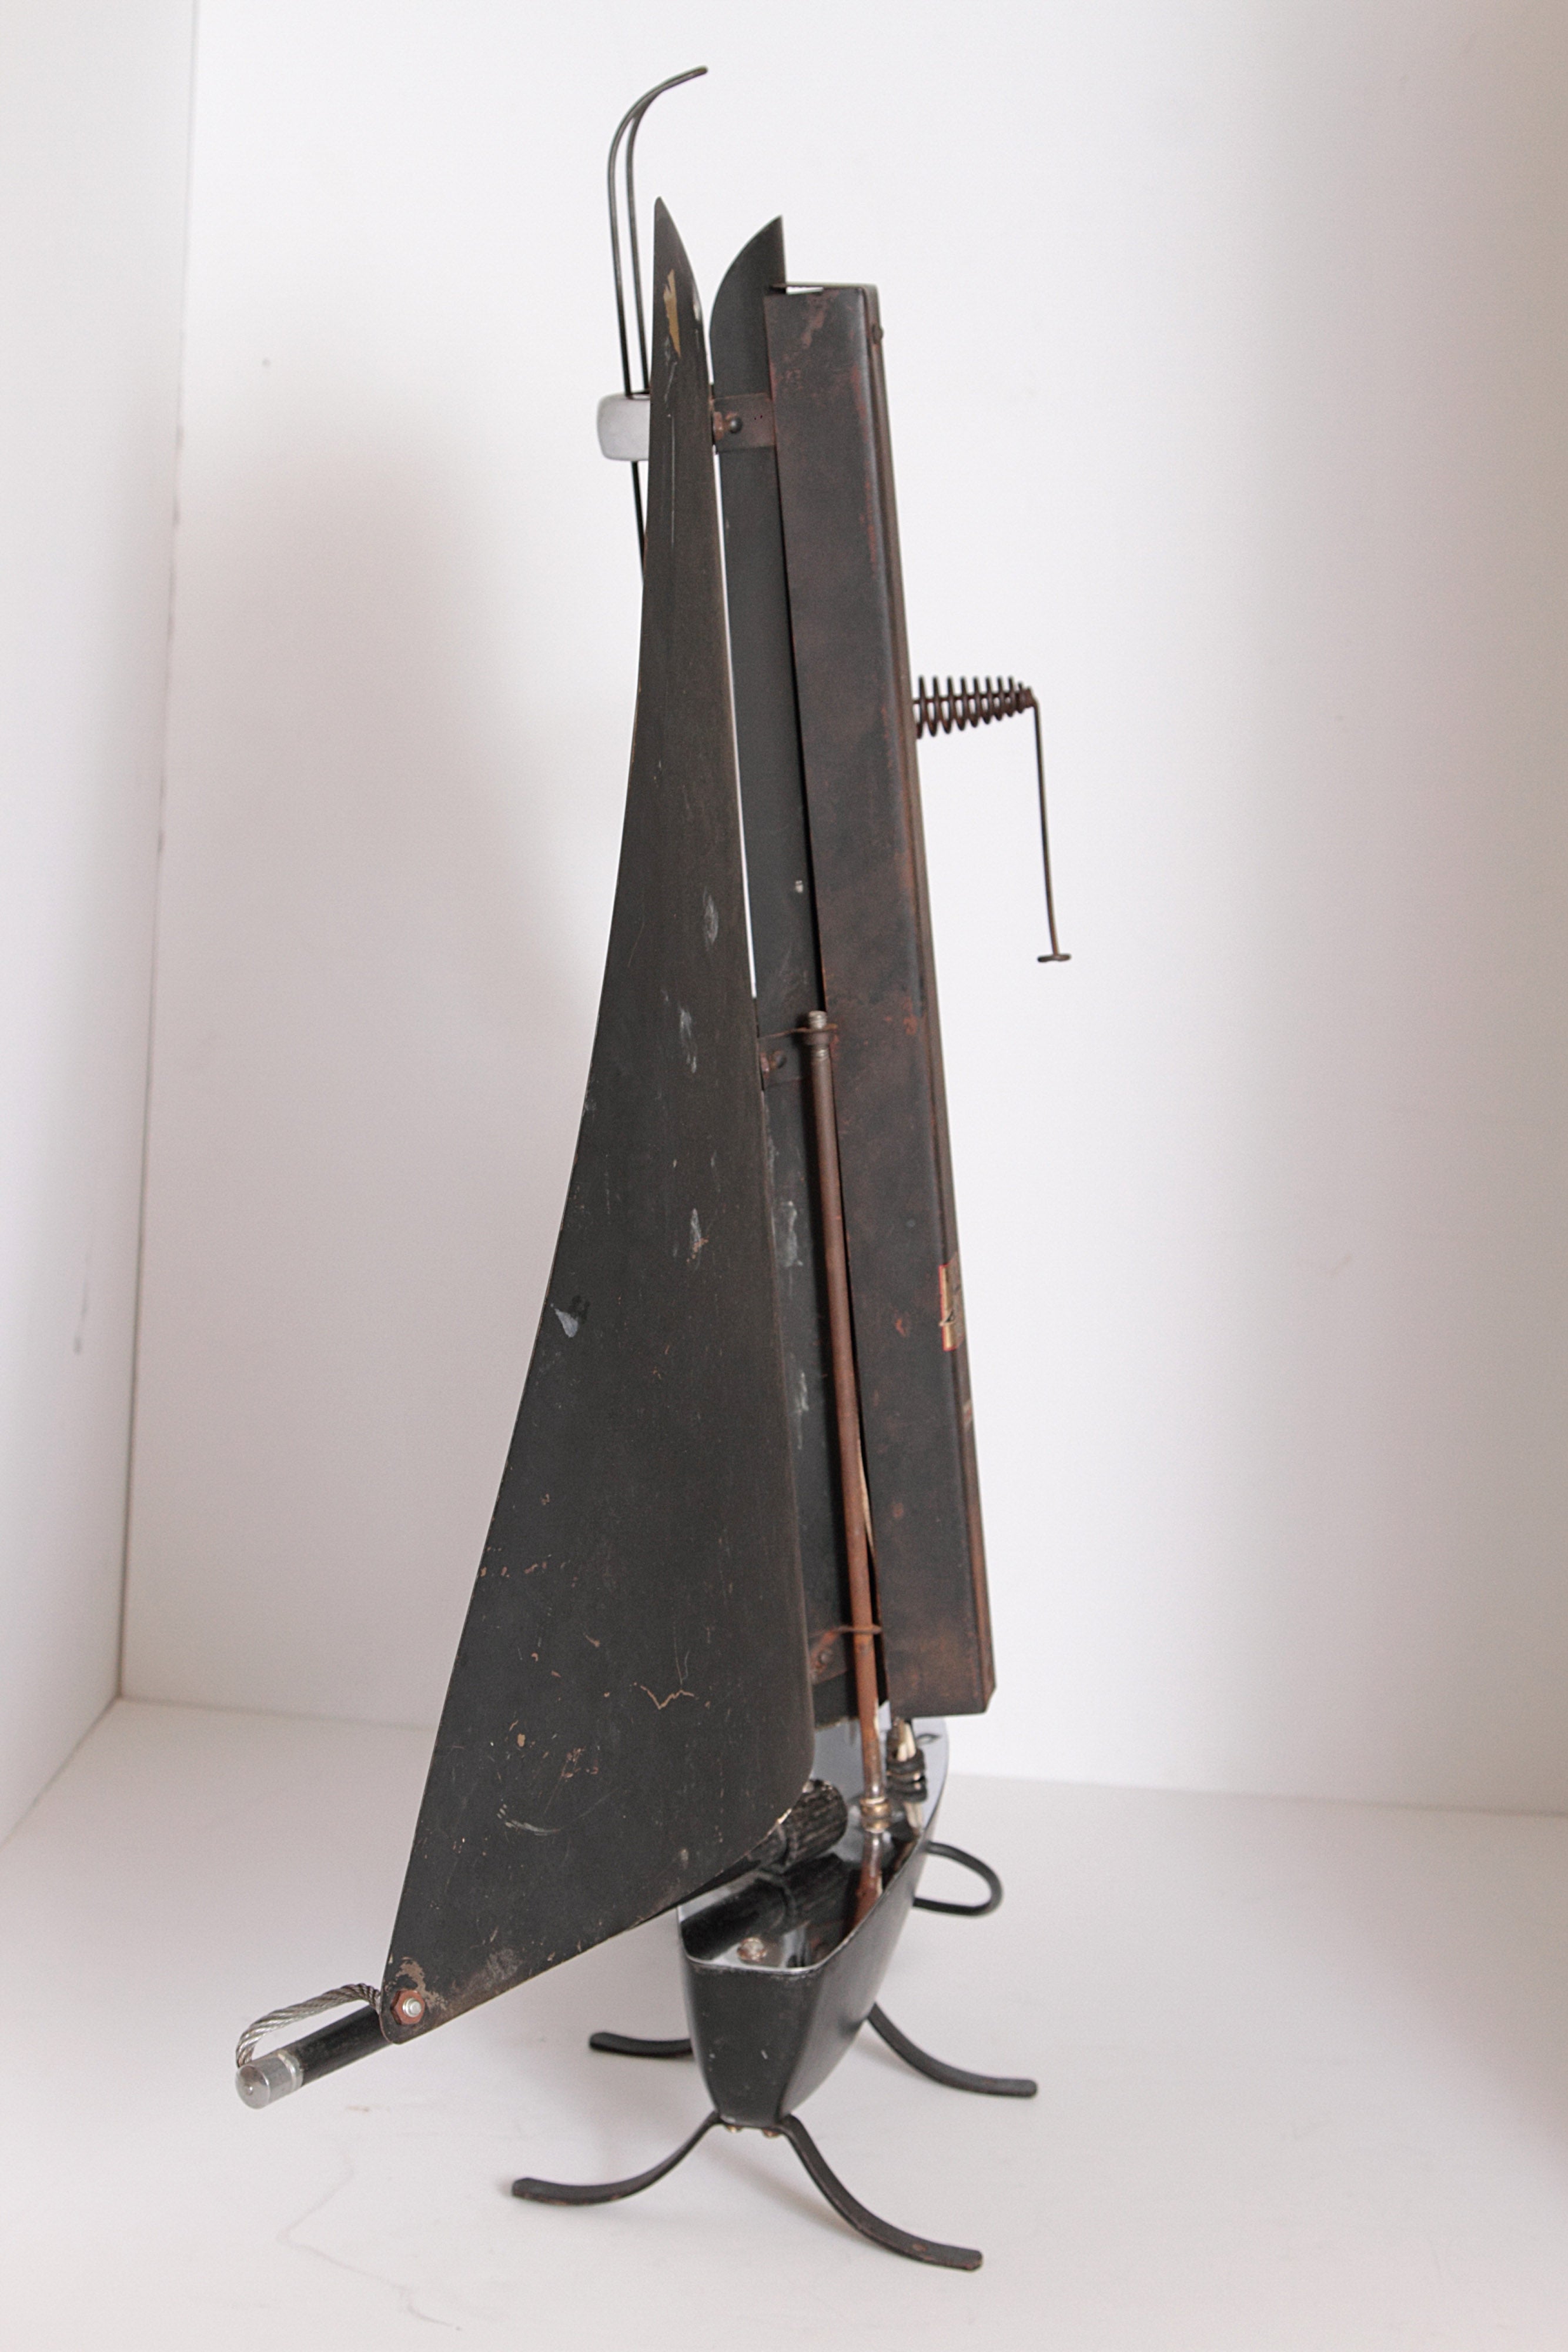 British Machine Age Sailboat Radiant Heater by Bunting Electric, circa 1930s In Good Condition For Sale In Dallas, TX